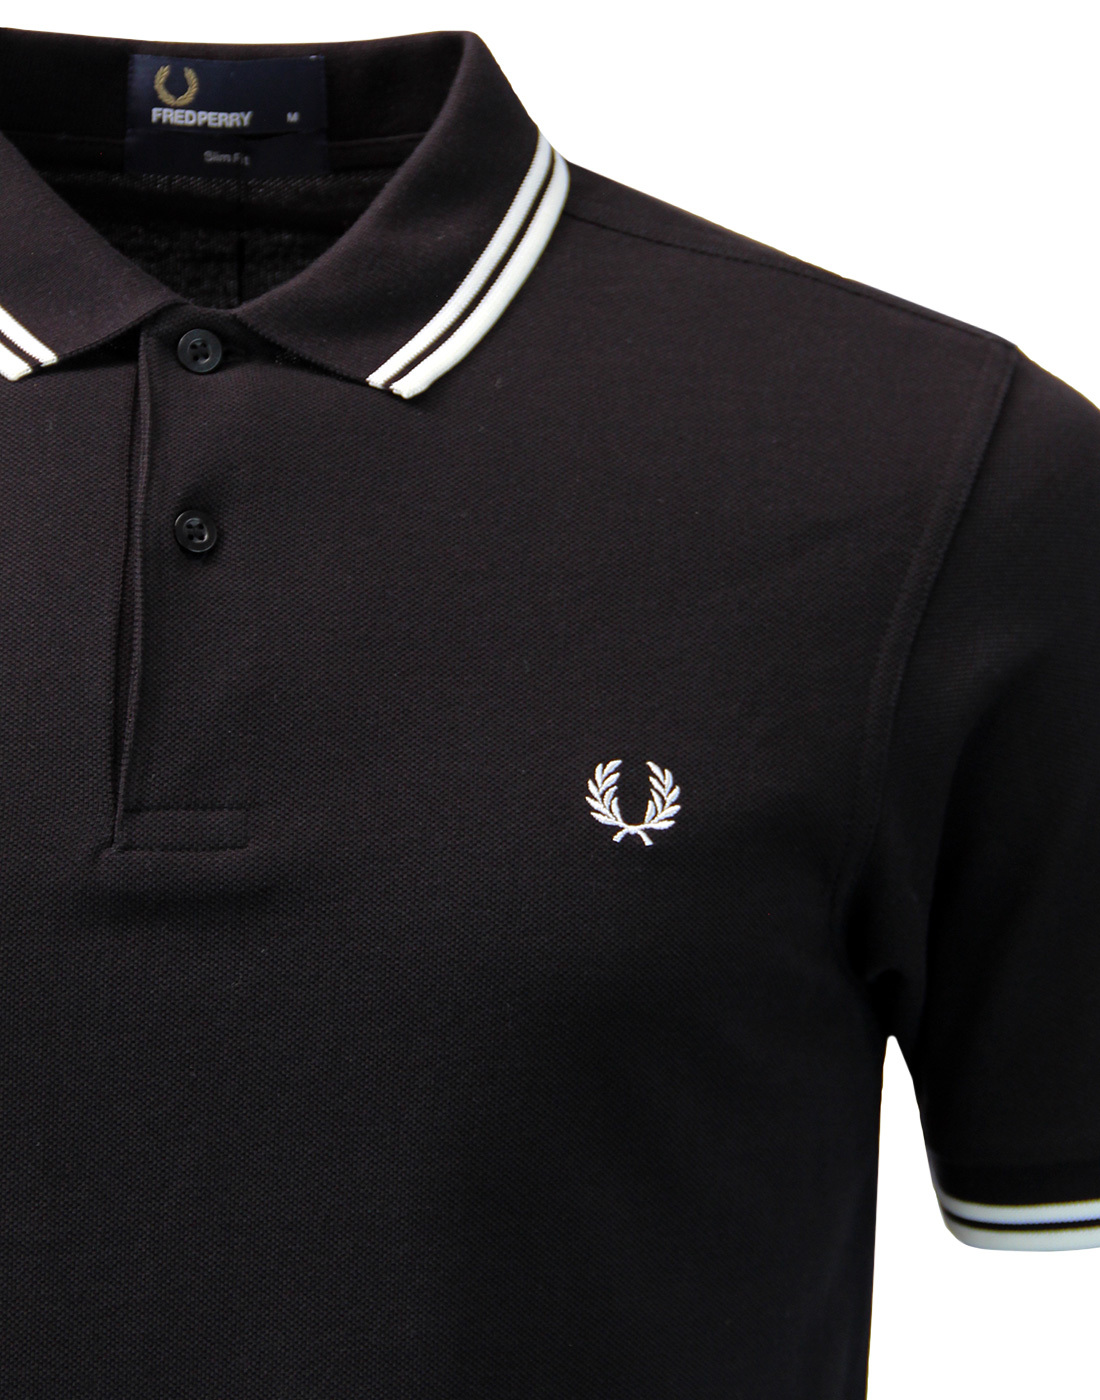 FRED PERRY Mens Twin Tipped Polo Shirt in Black/White